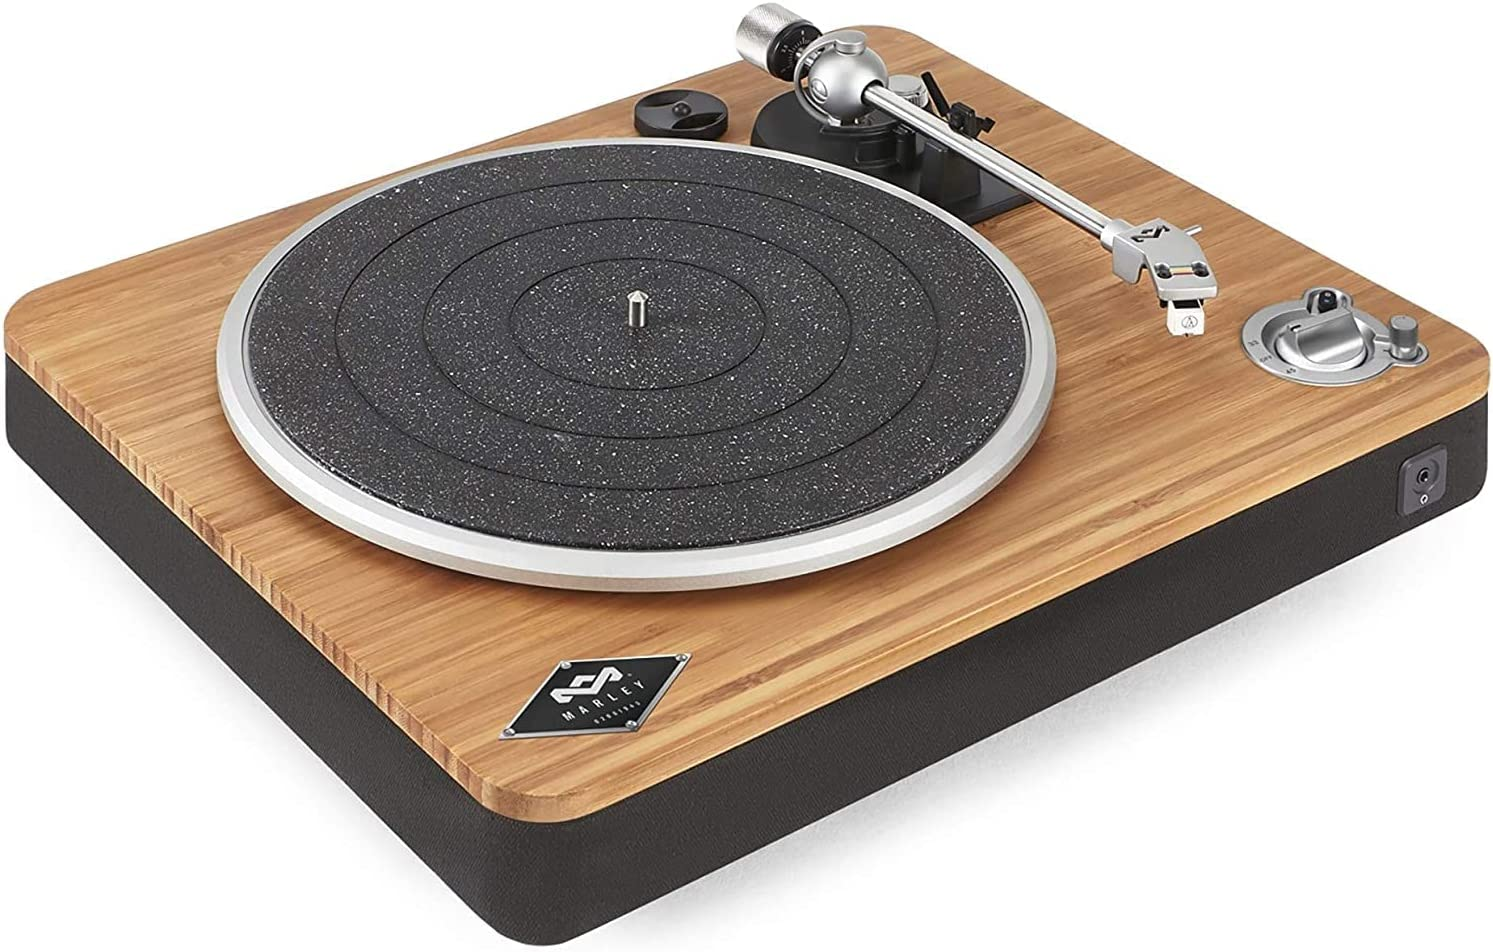 Bluetooth vinyl record player- House of Marley